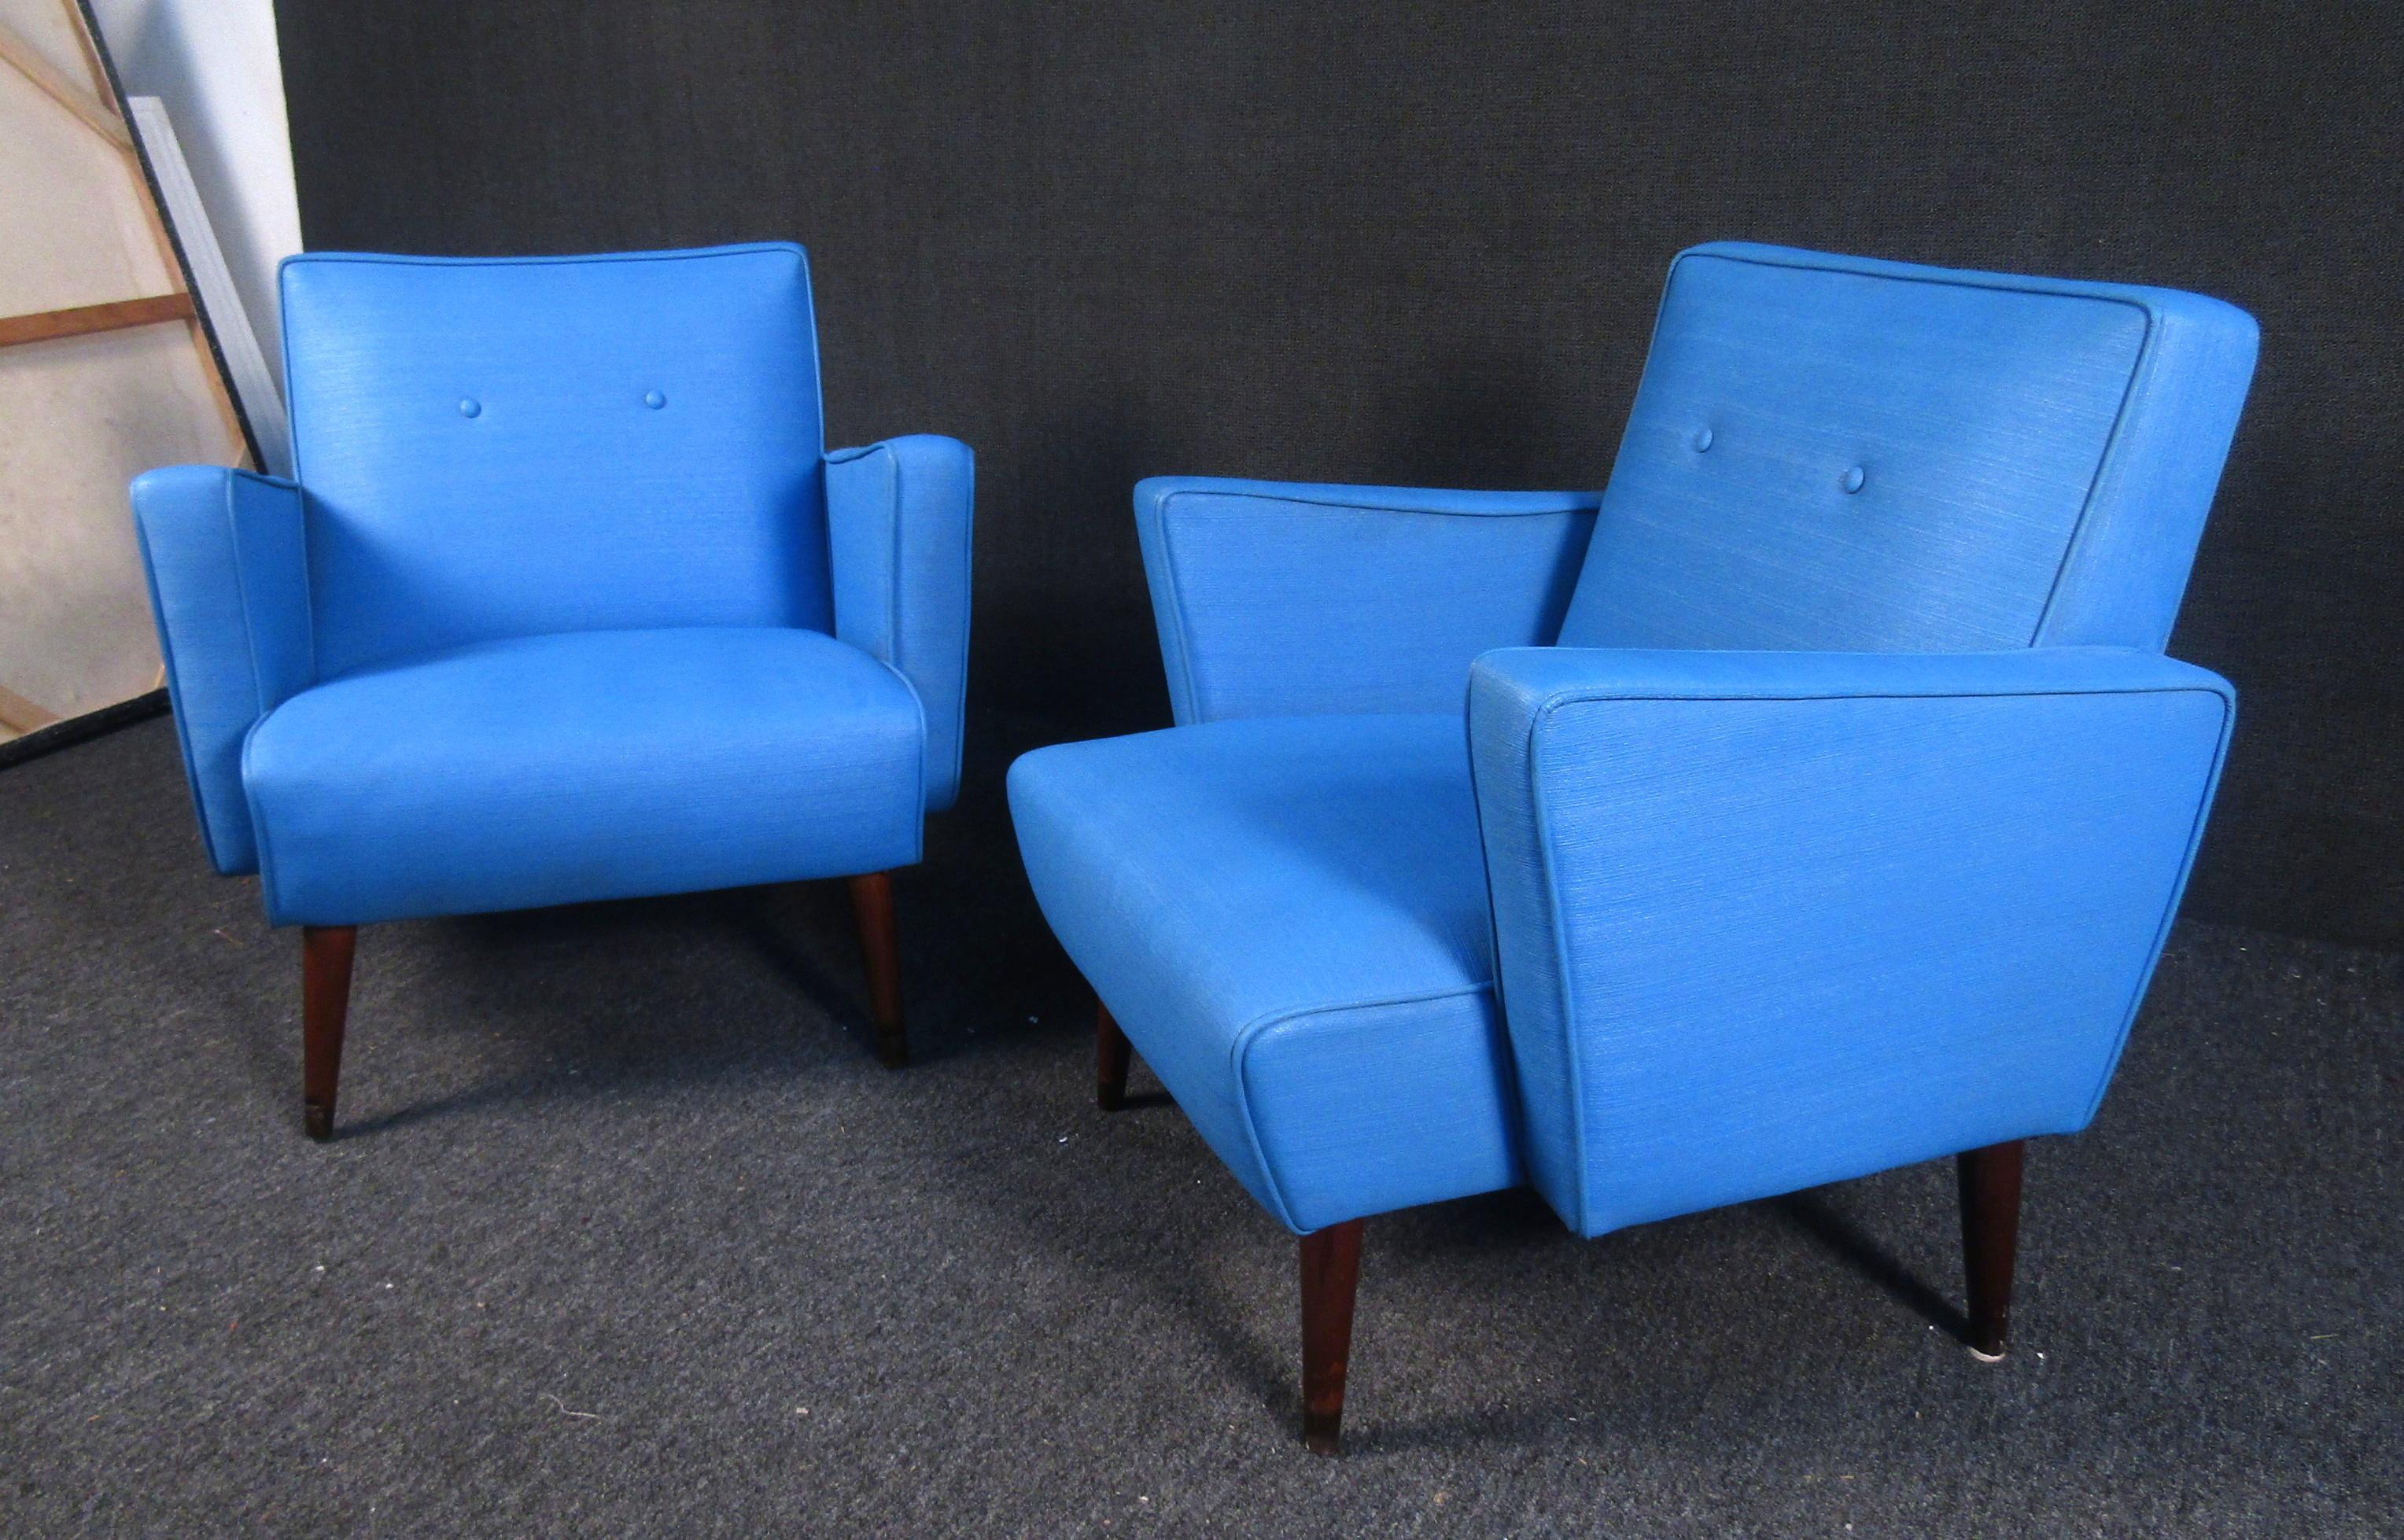 Naugahyde Pair of Mid-Century Modern Lounge Chairs For Sale